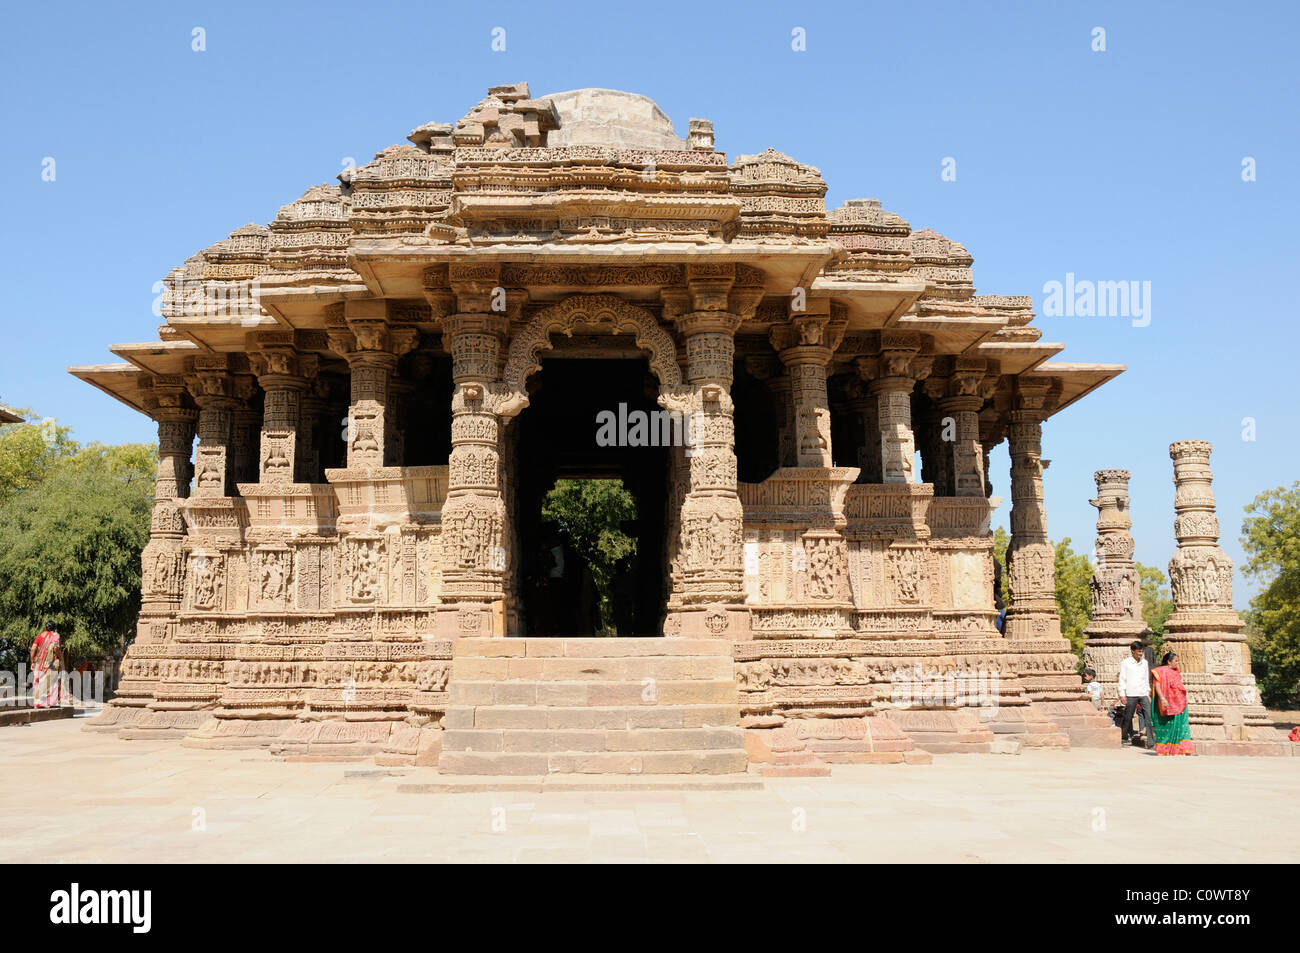 Sun Temple of Modhera. This Hindu temple is dedicated to God Sun. It was built by King Bhimdev Solanki in 1026 A.D. Stock Photo